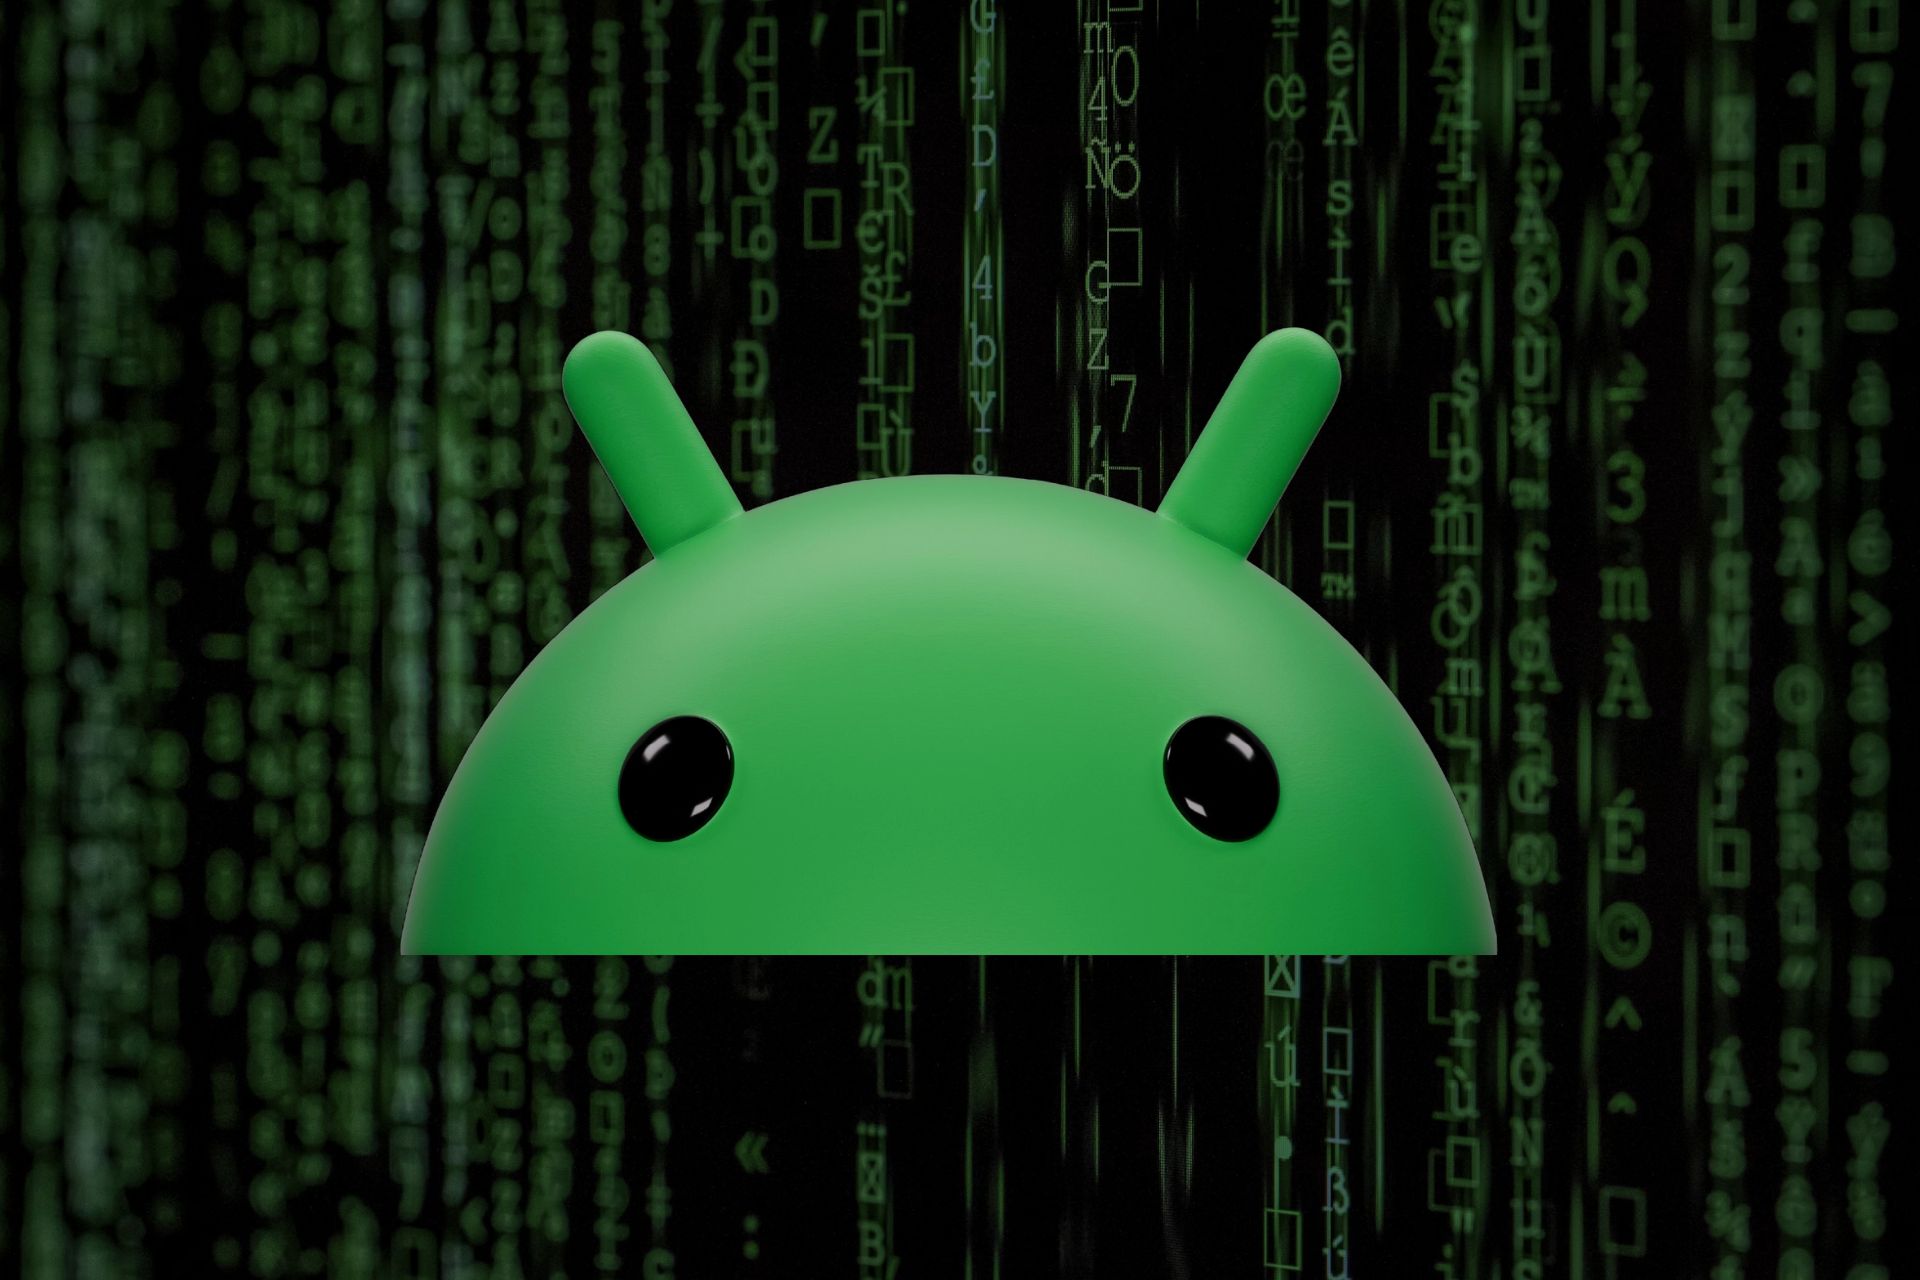 Microsoft reports 'Dirty Stream' vulnerability impacts Android apps